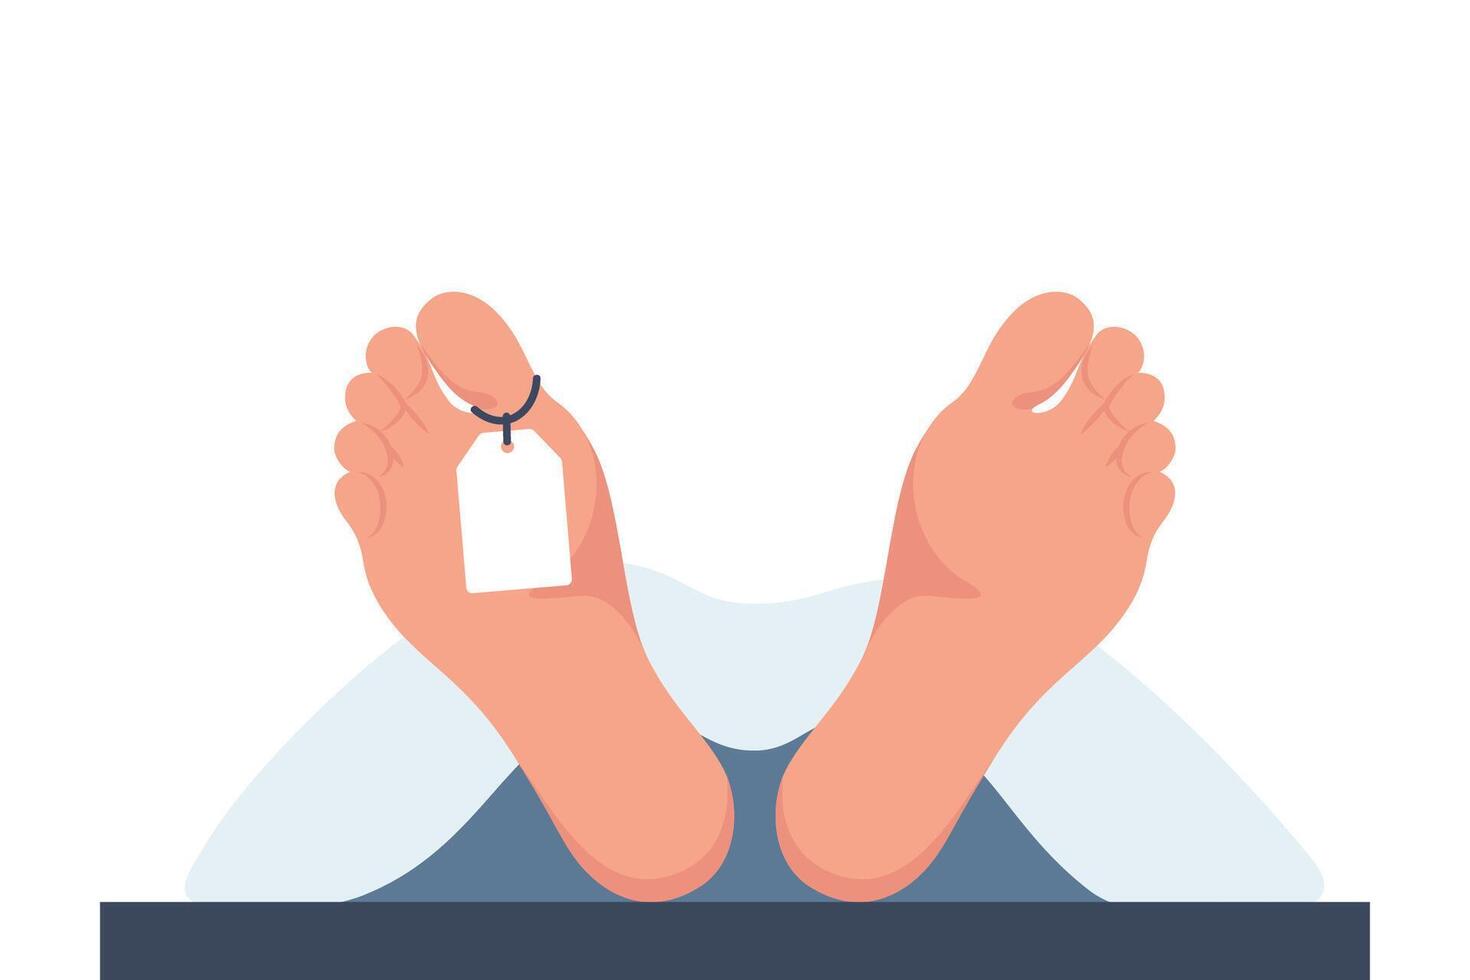 Corpse in the morgue. Dead man in the morgue. Legs of a dead man with a white tag. The human body is covered with a white sheet. Vector illustration.